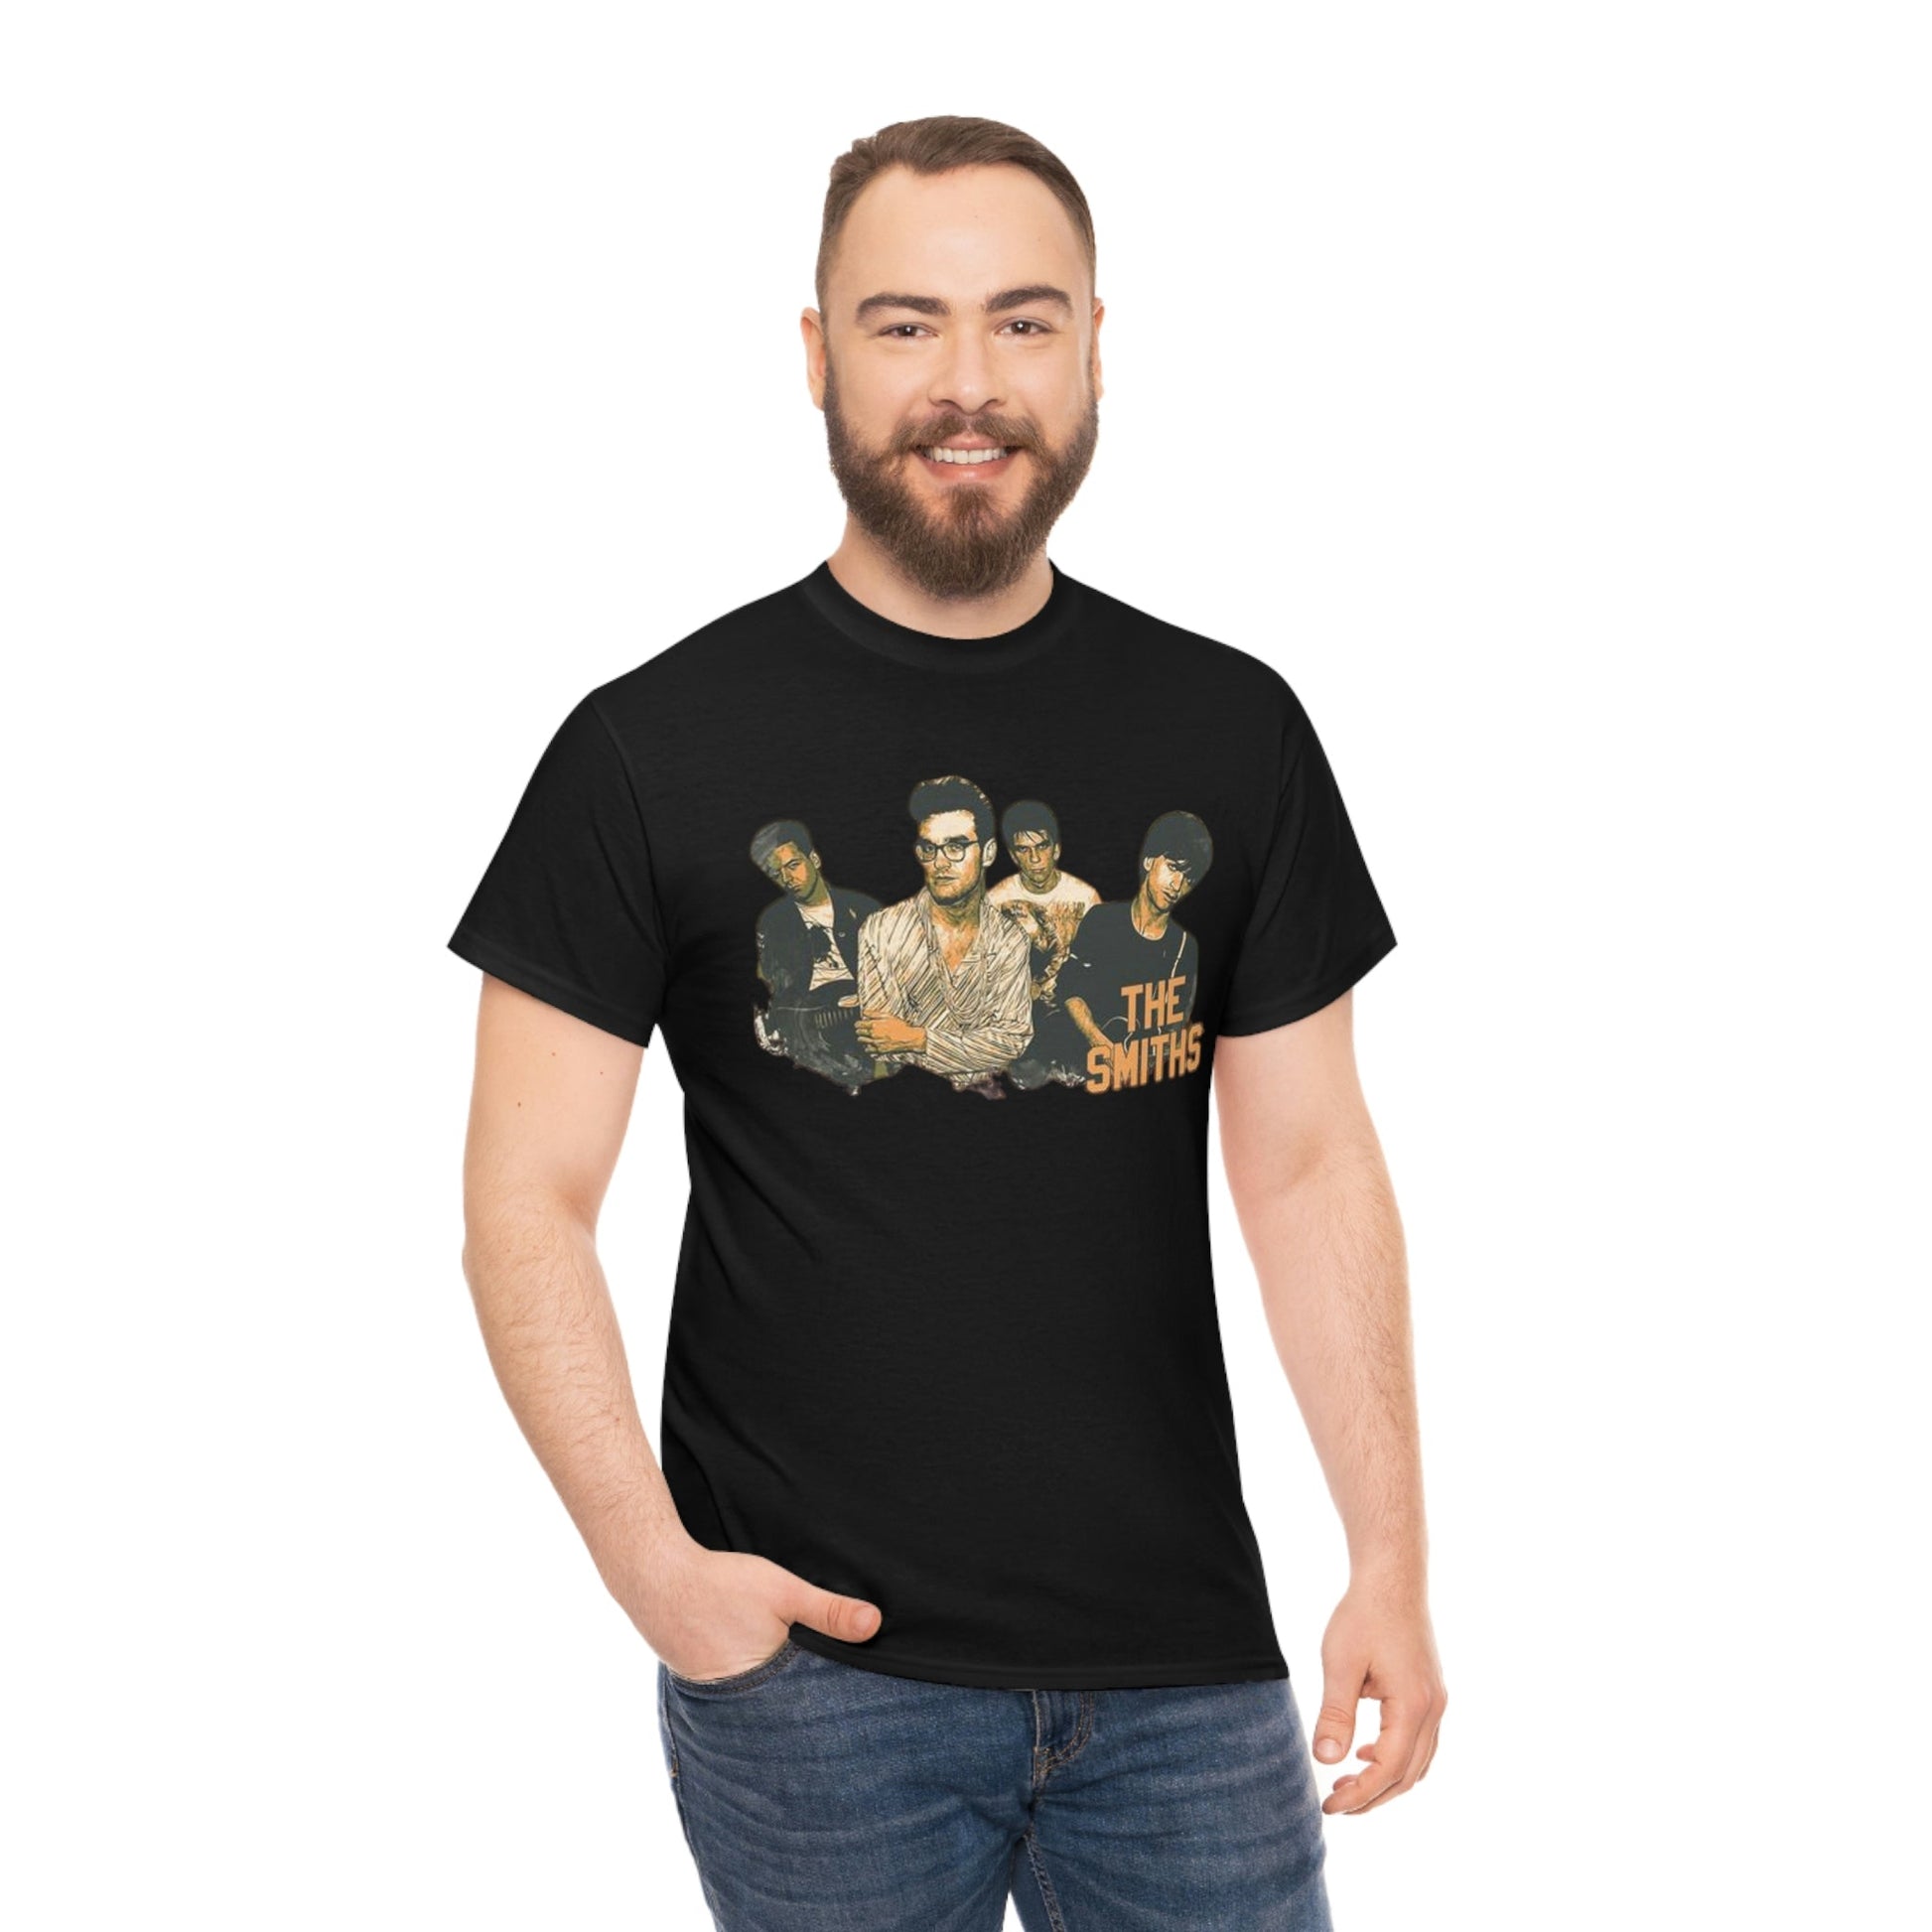 The Smiths T-Shirt - RetroTeeShop